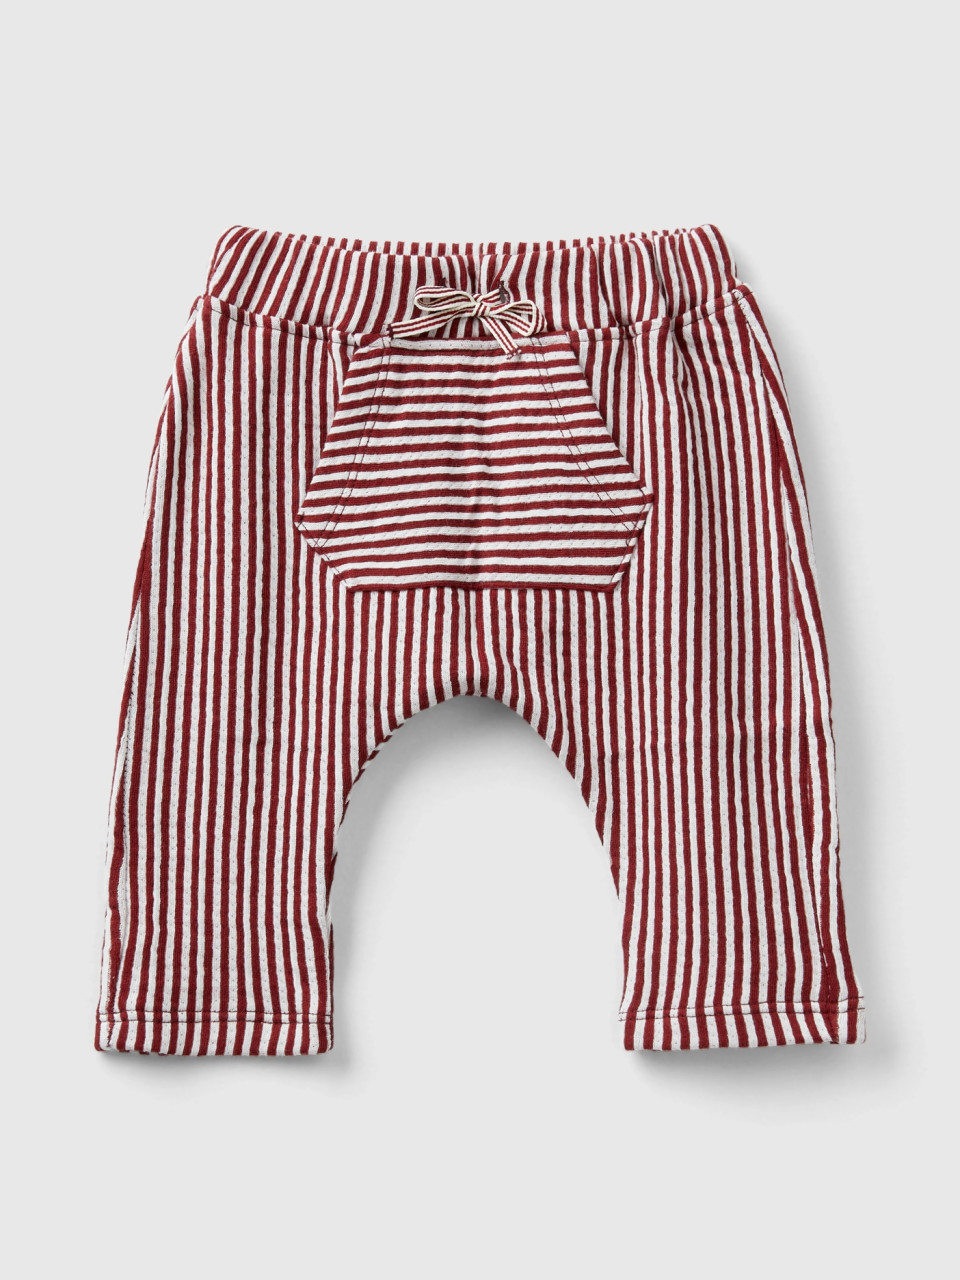 Benetton, Striped Trousers With Pocket, Burgundy, Kids